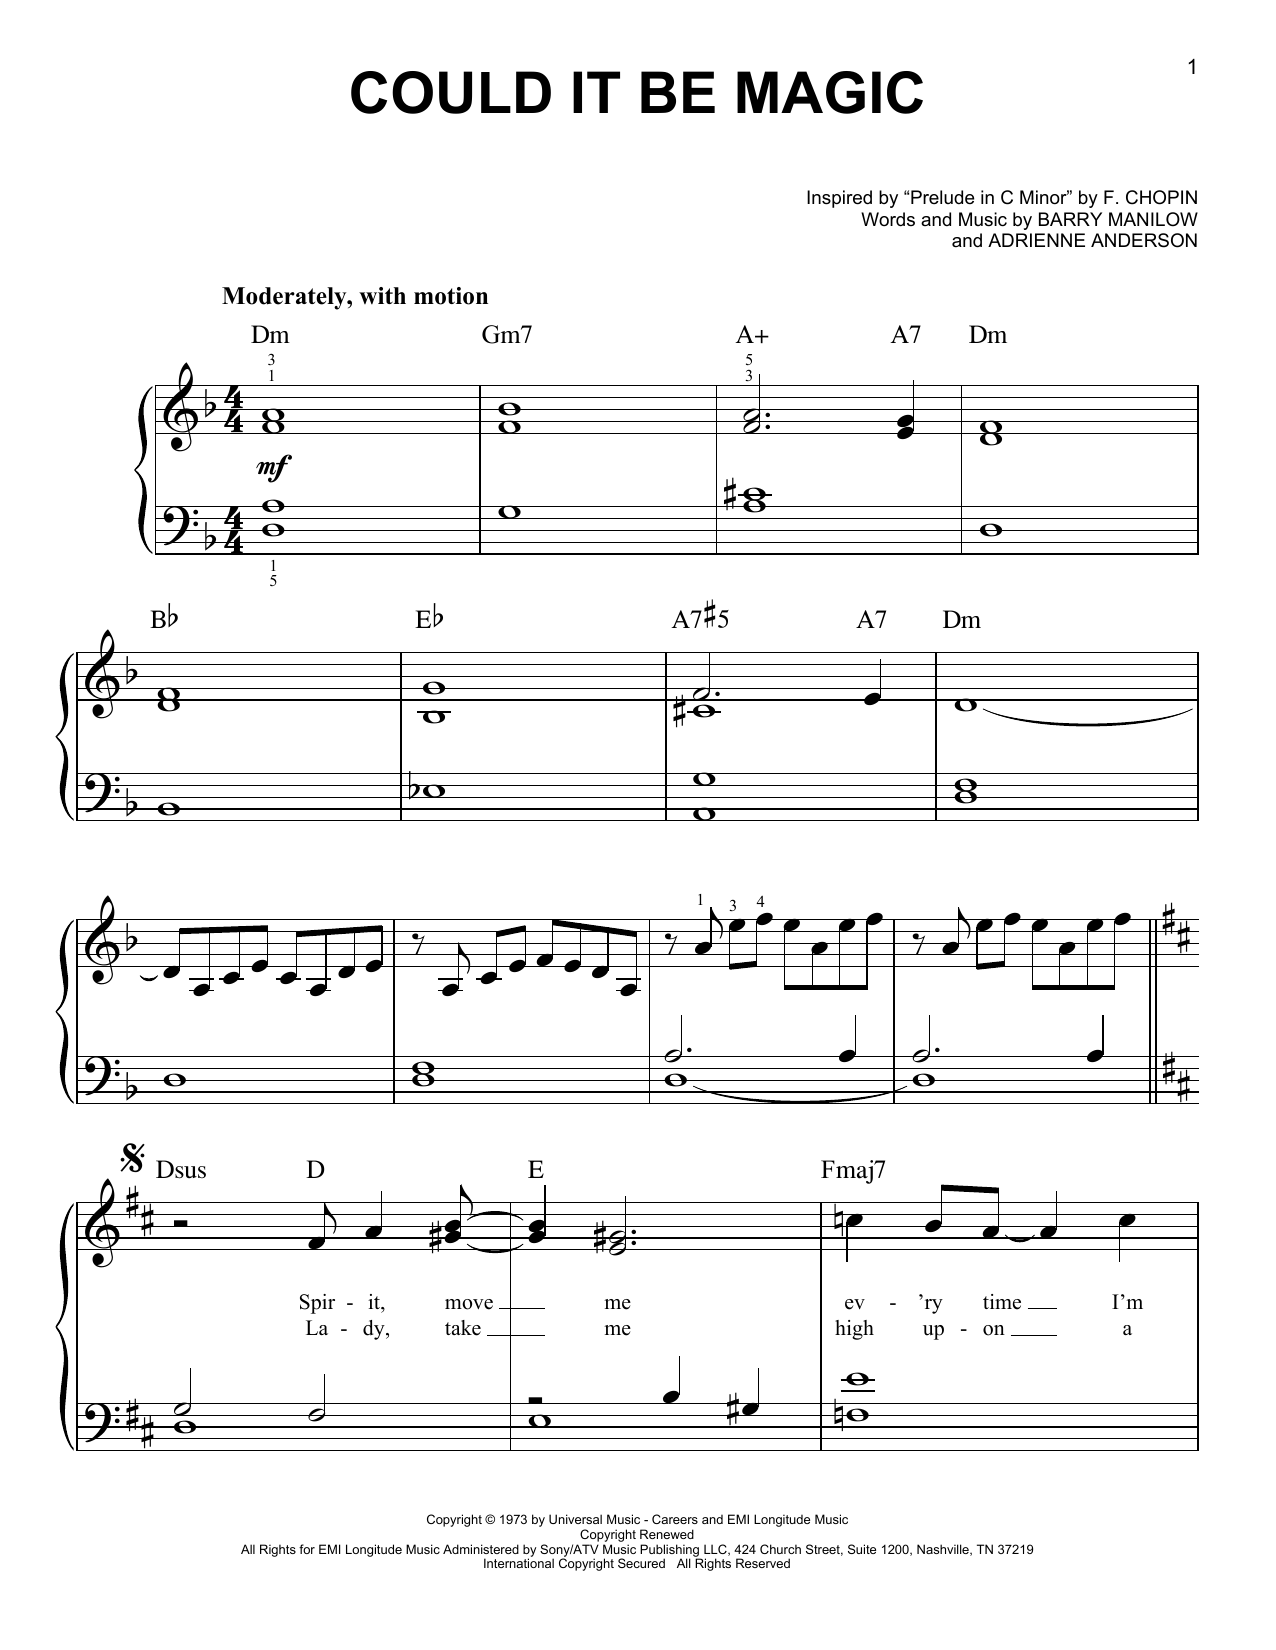 Barry Manilow Could It Be Magic sheet music notes and chords. Download Printable PDF.